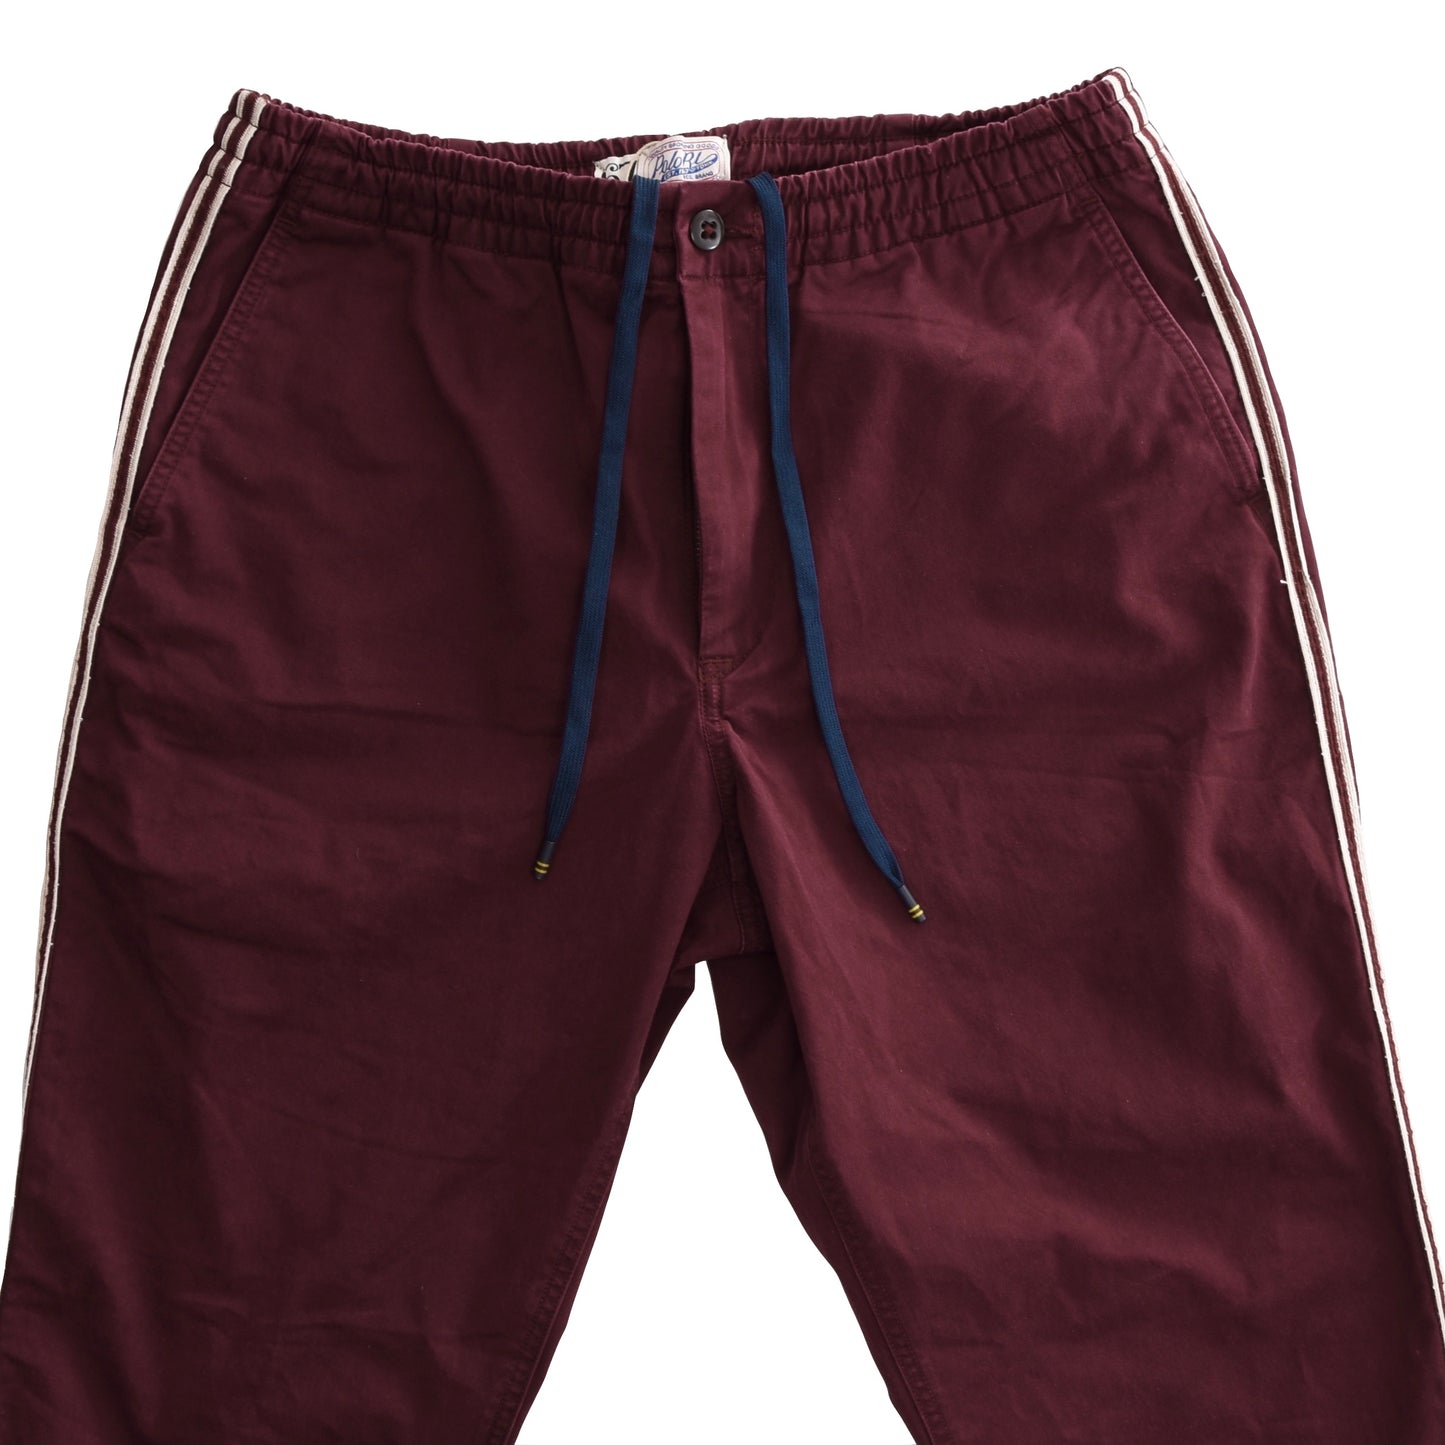 Polo Ralph Lauren Drawstring Work From Home Pants Size M - Burgundy